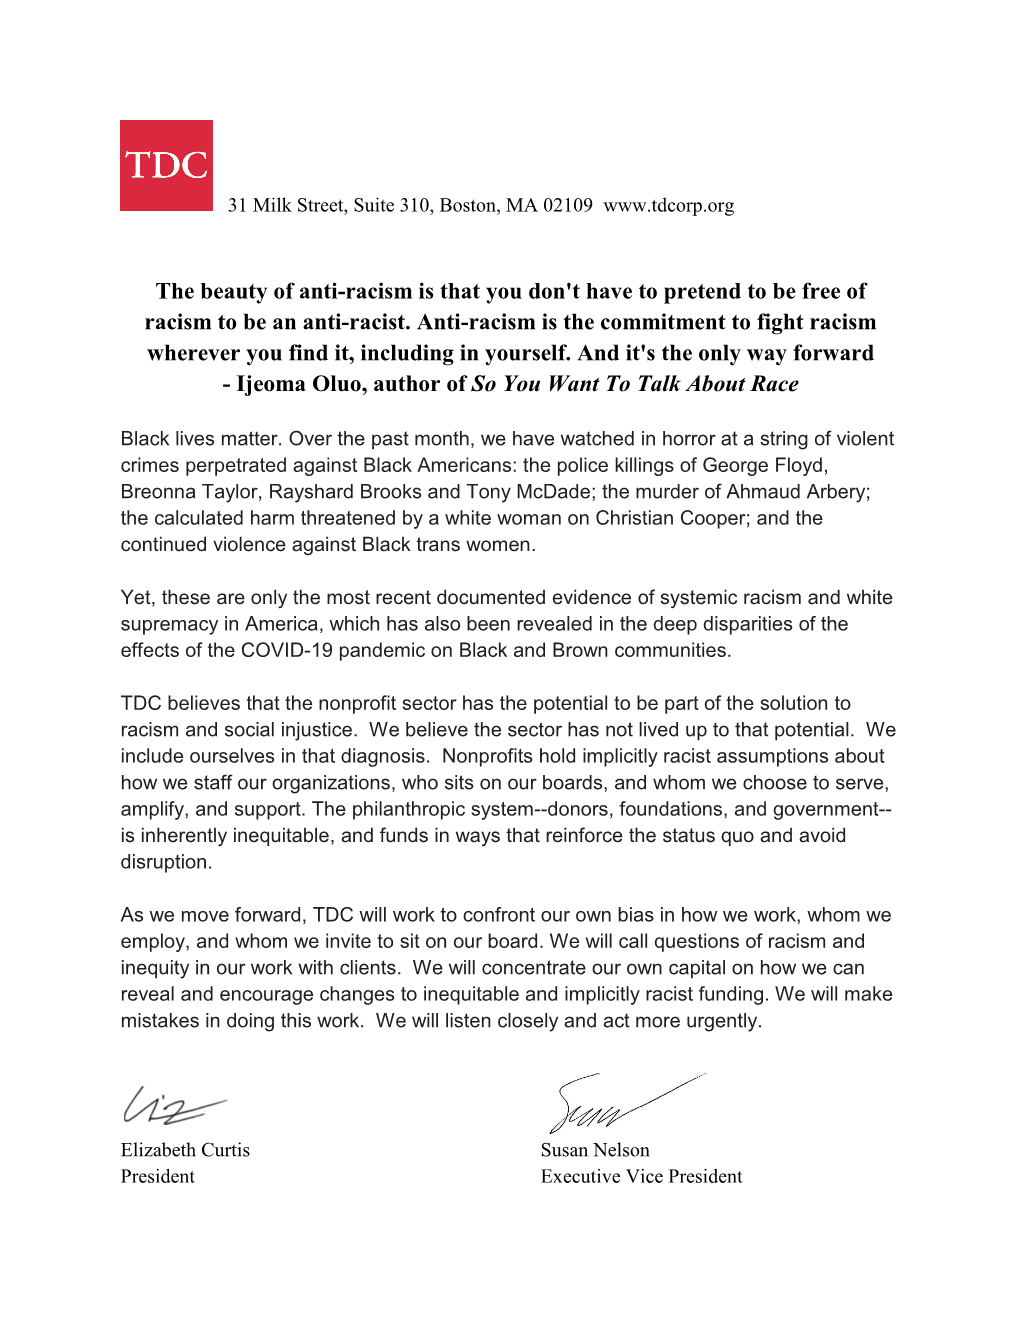 Read TDC's Statement on Anti-Racism and Social Justice